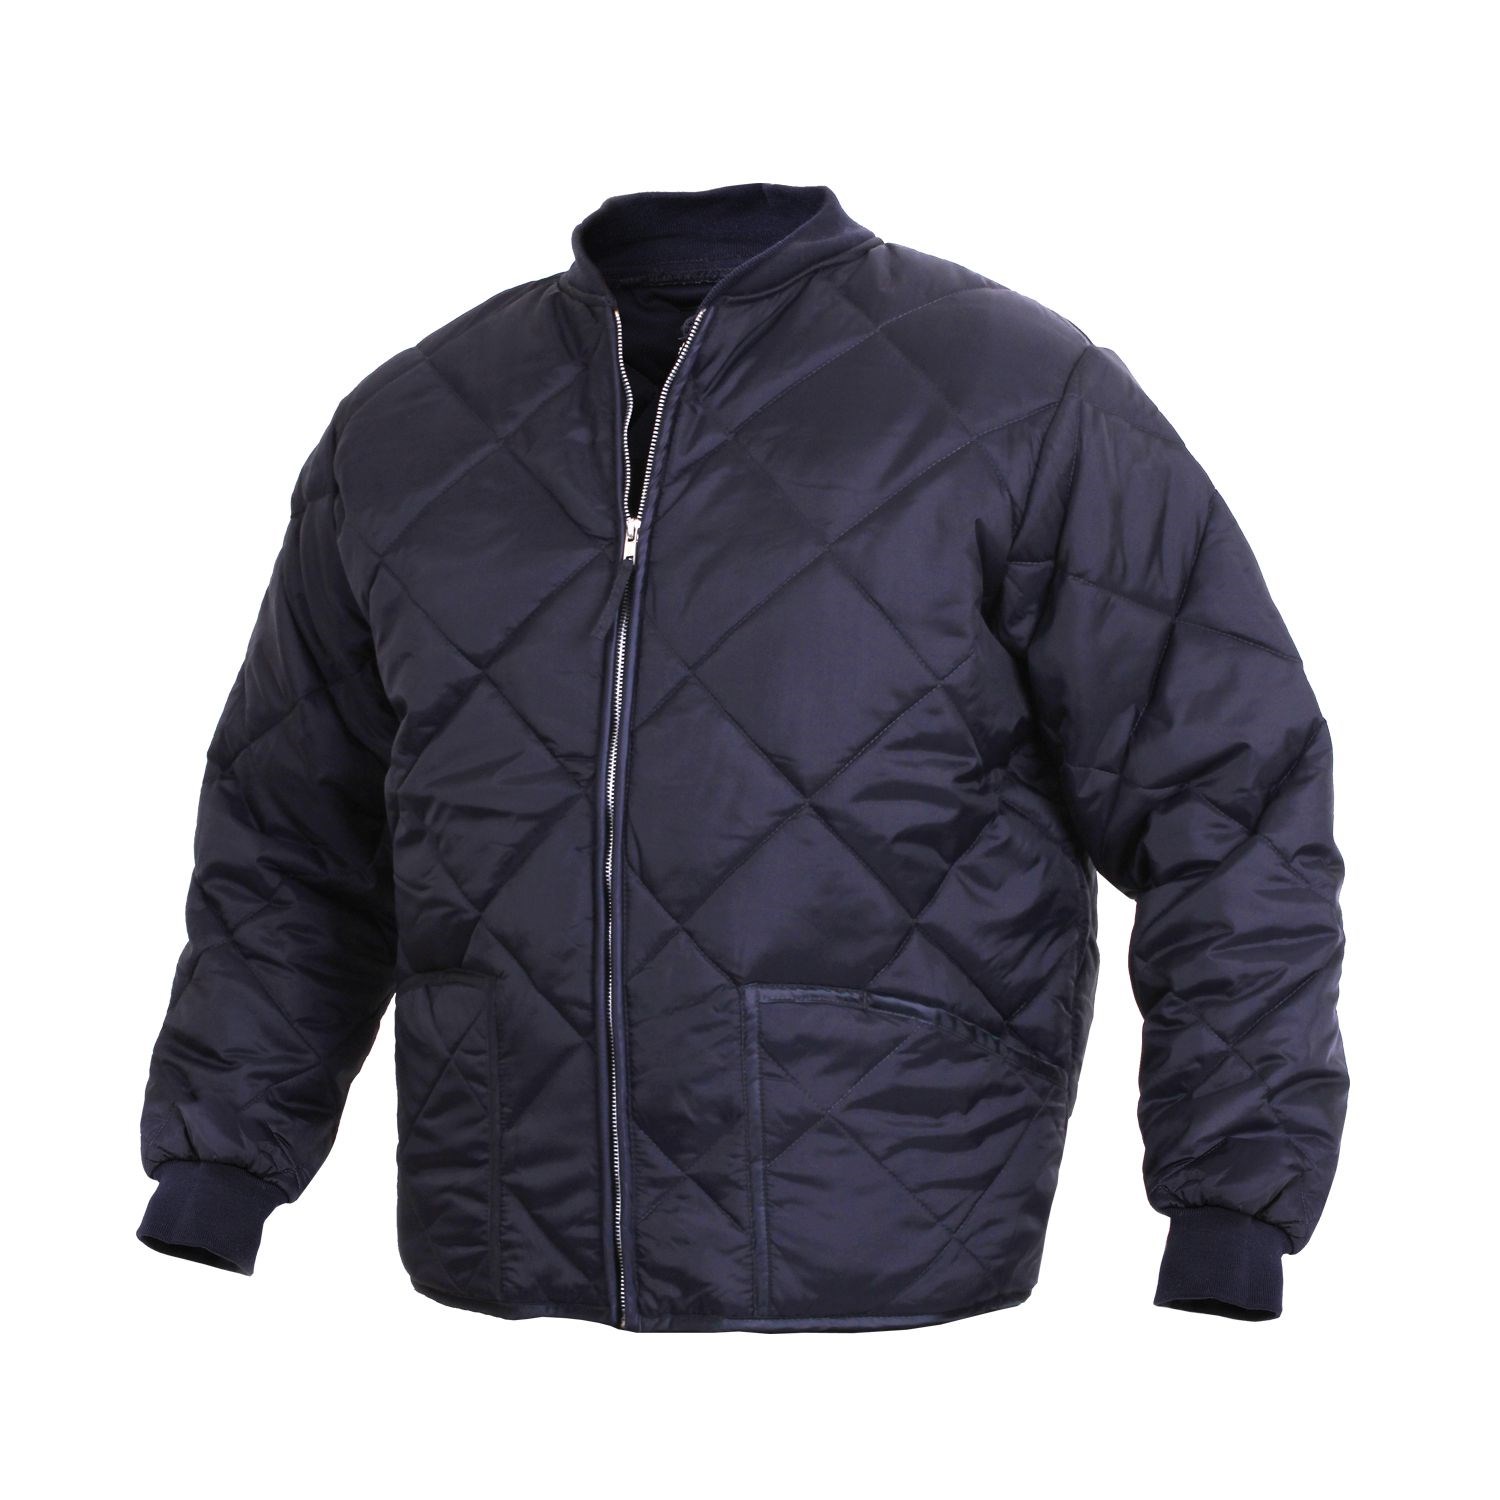 Quilted jacket DIAMOND FLIGHT BLUE ROTHCO 7160NVY L-11